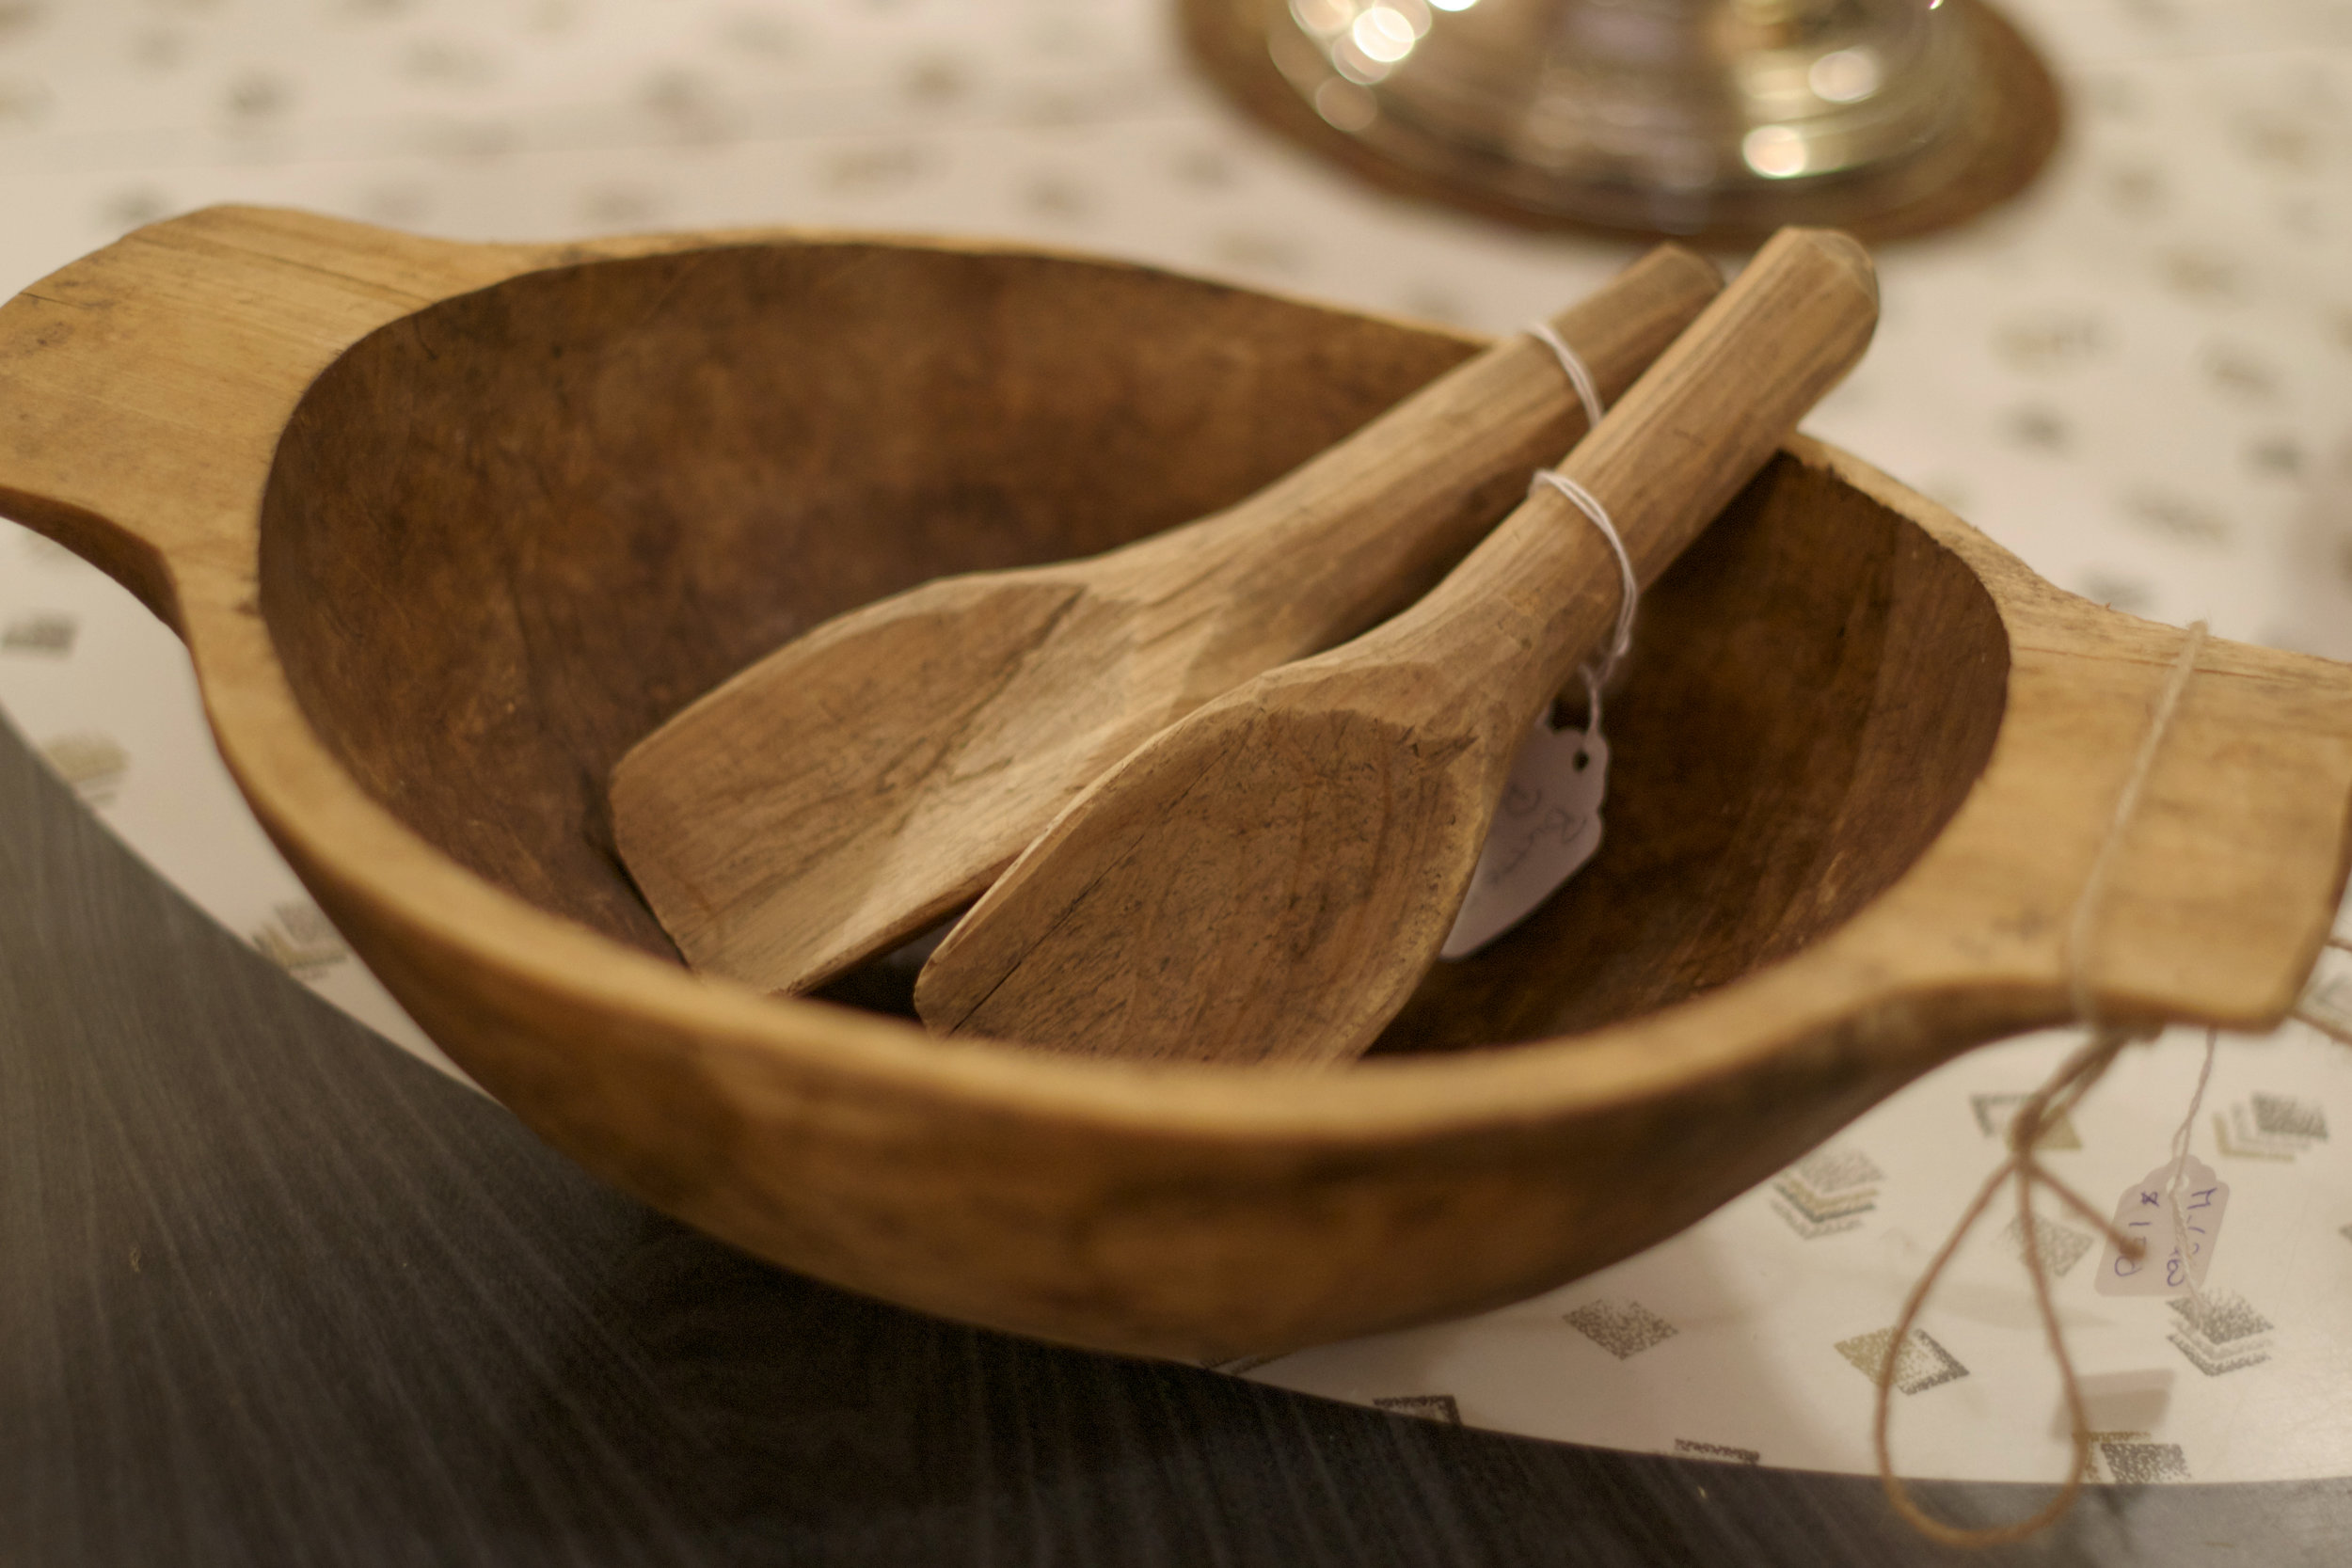 wooden-bowl-and-spoons.jpg